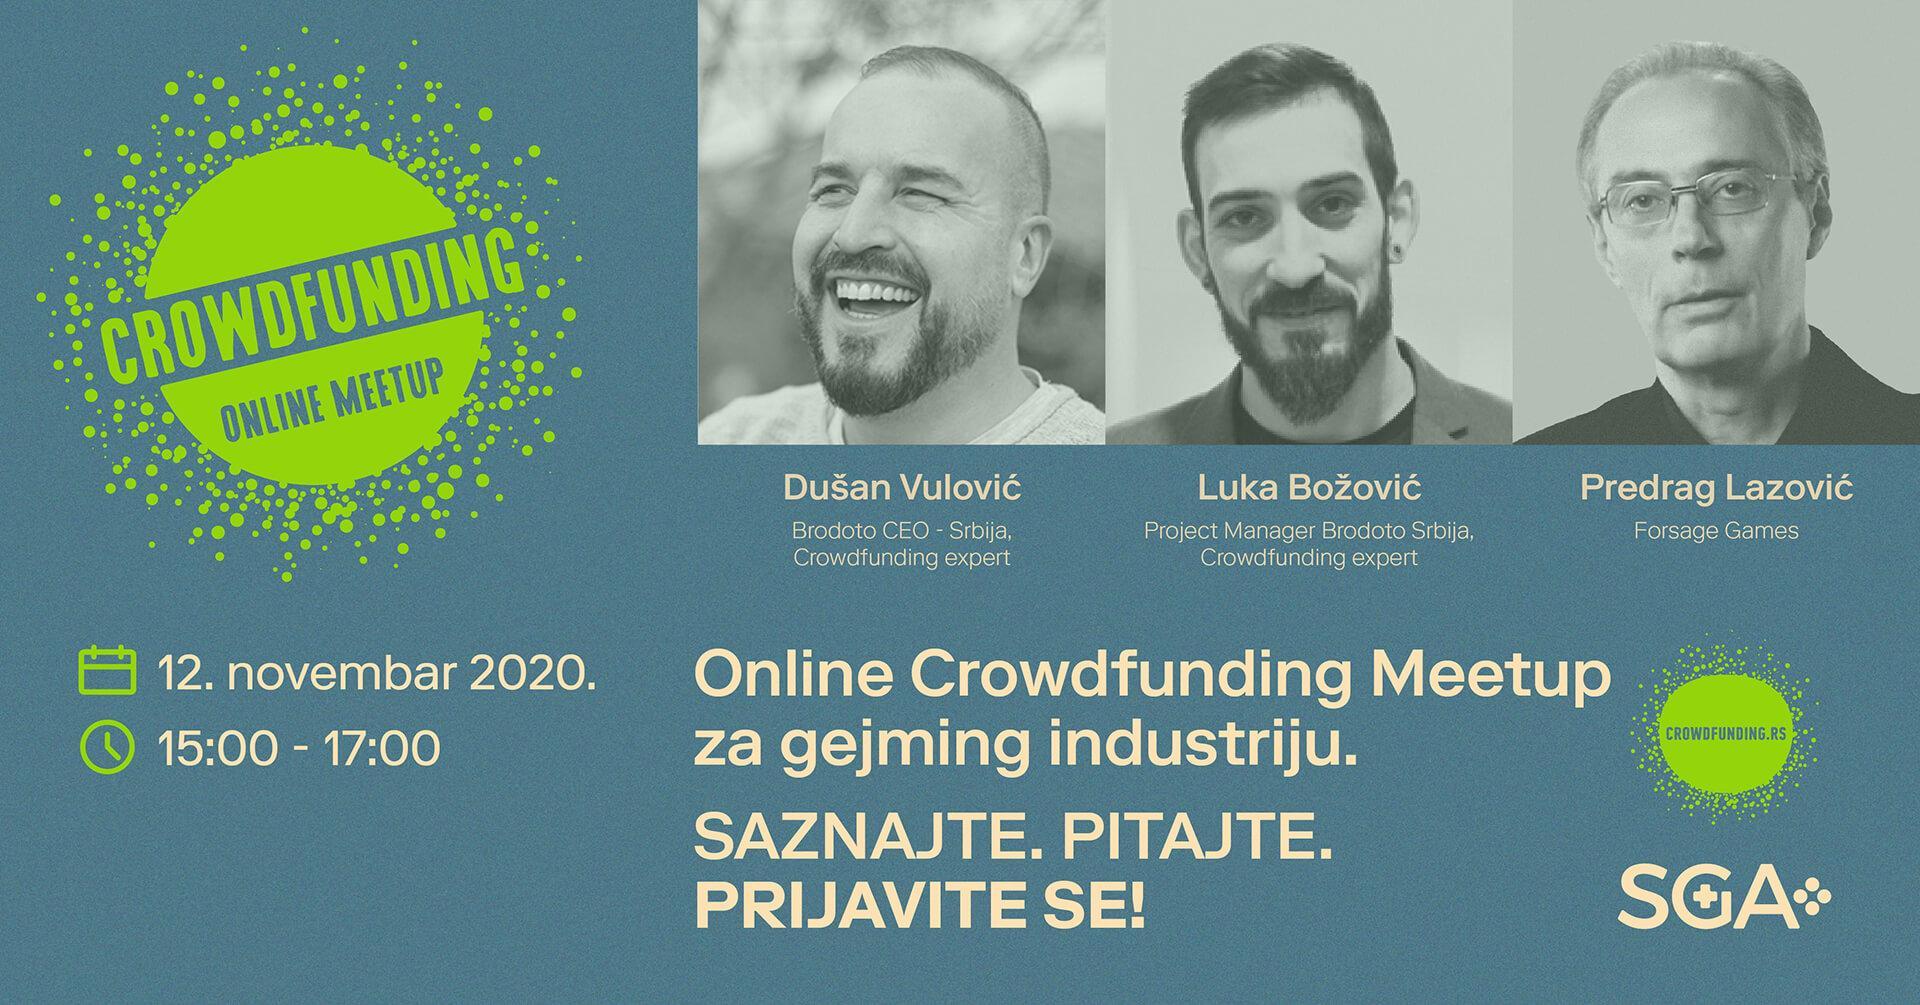 Online Crowdfunding Meetup for the gaming industry: Apply for participation